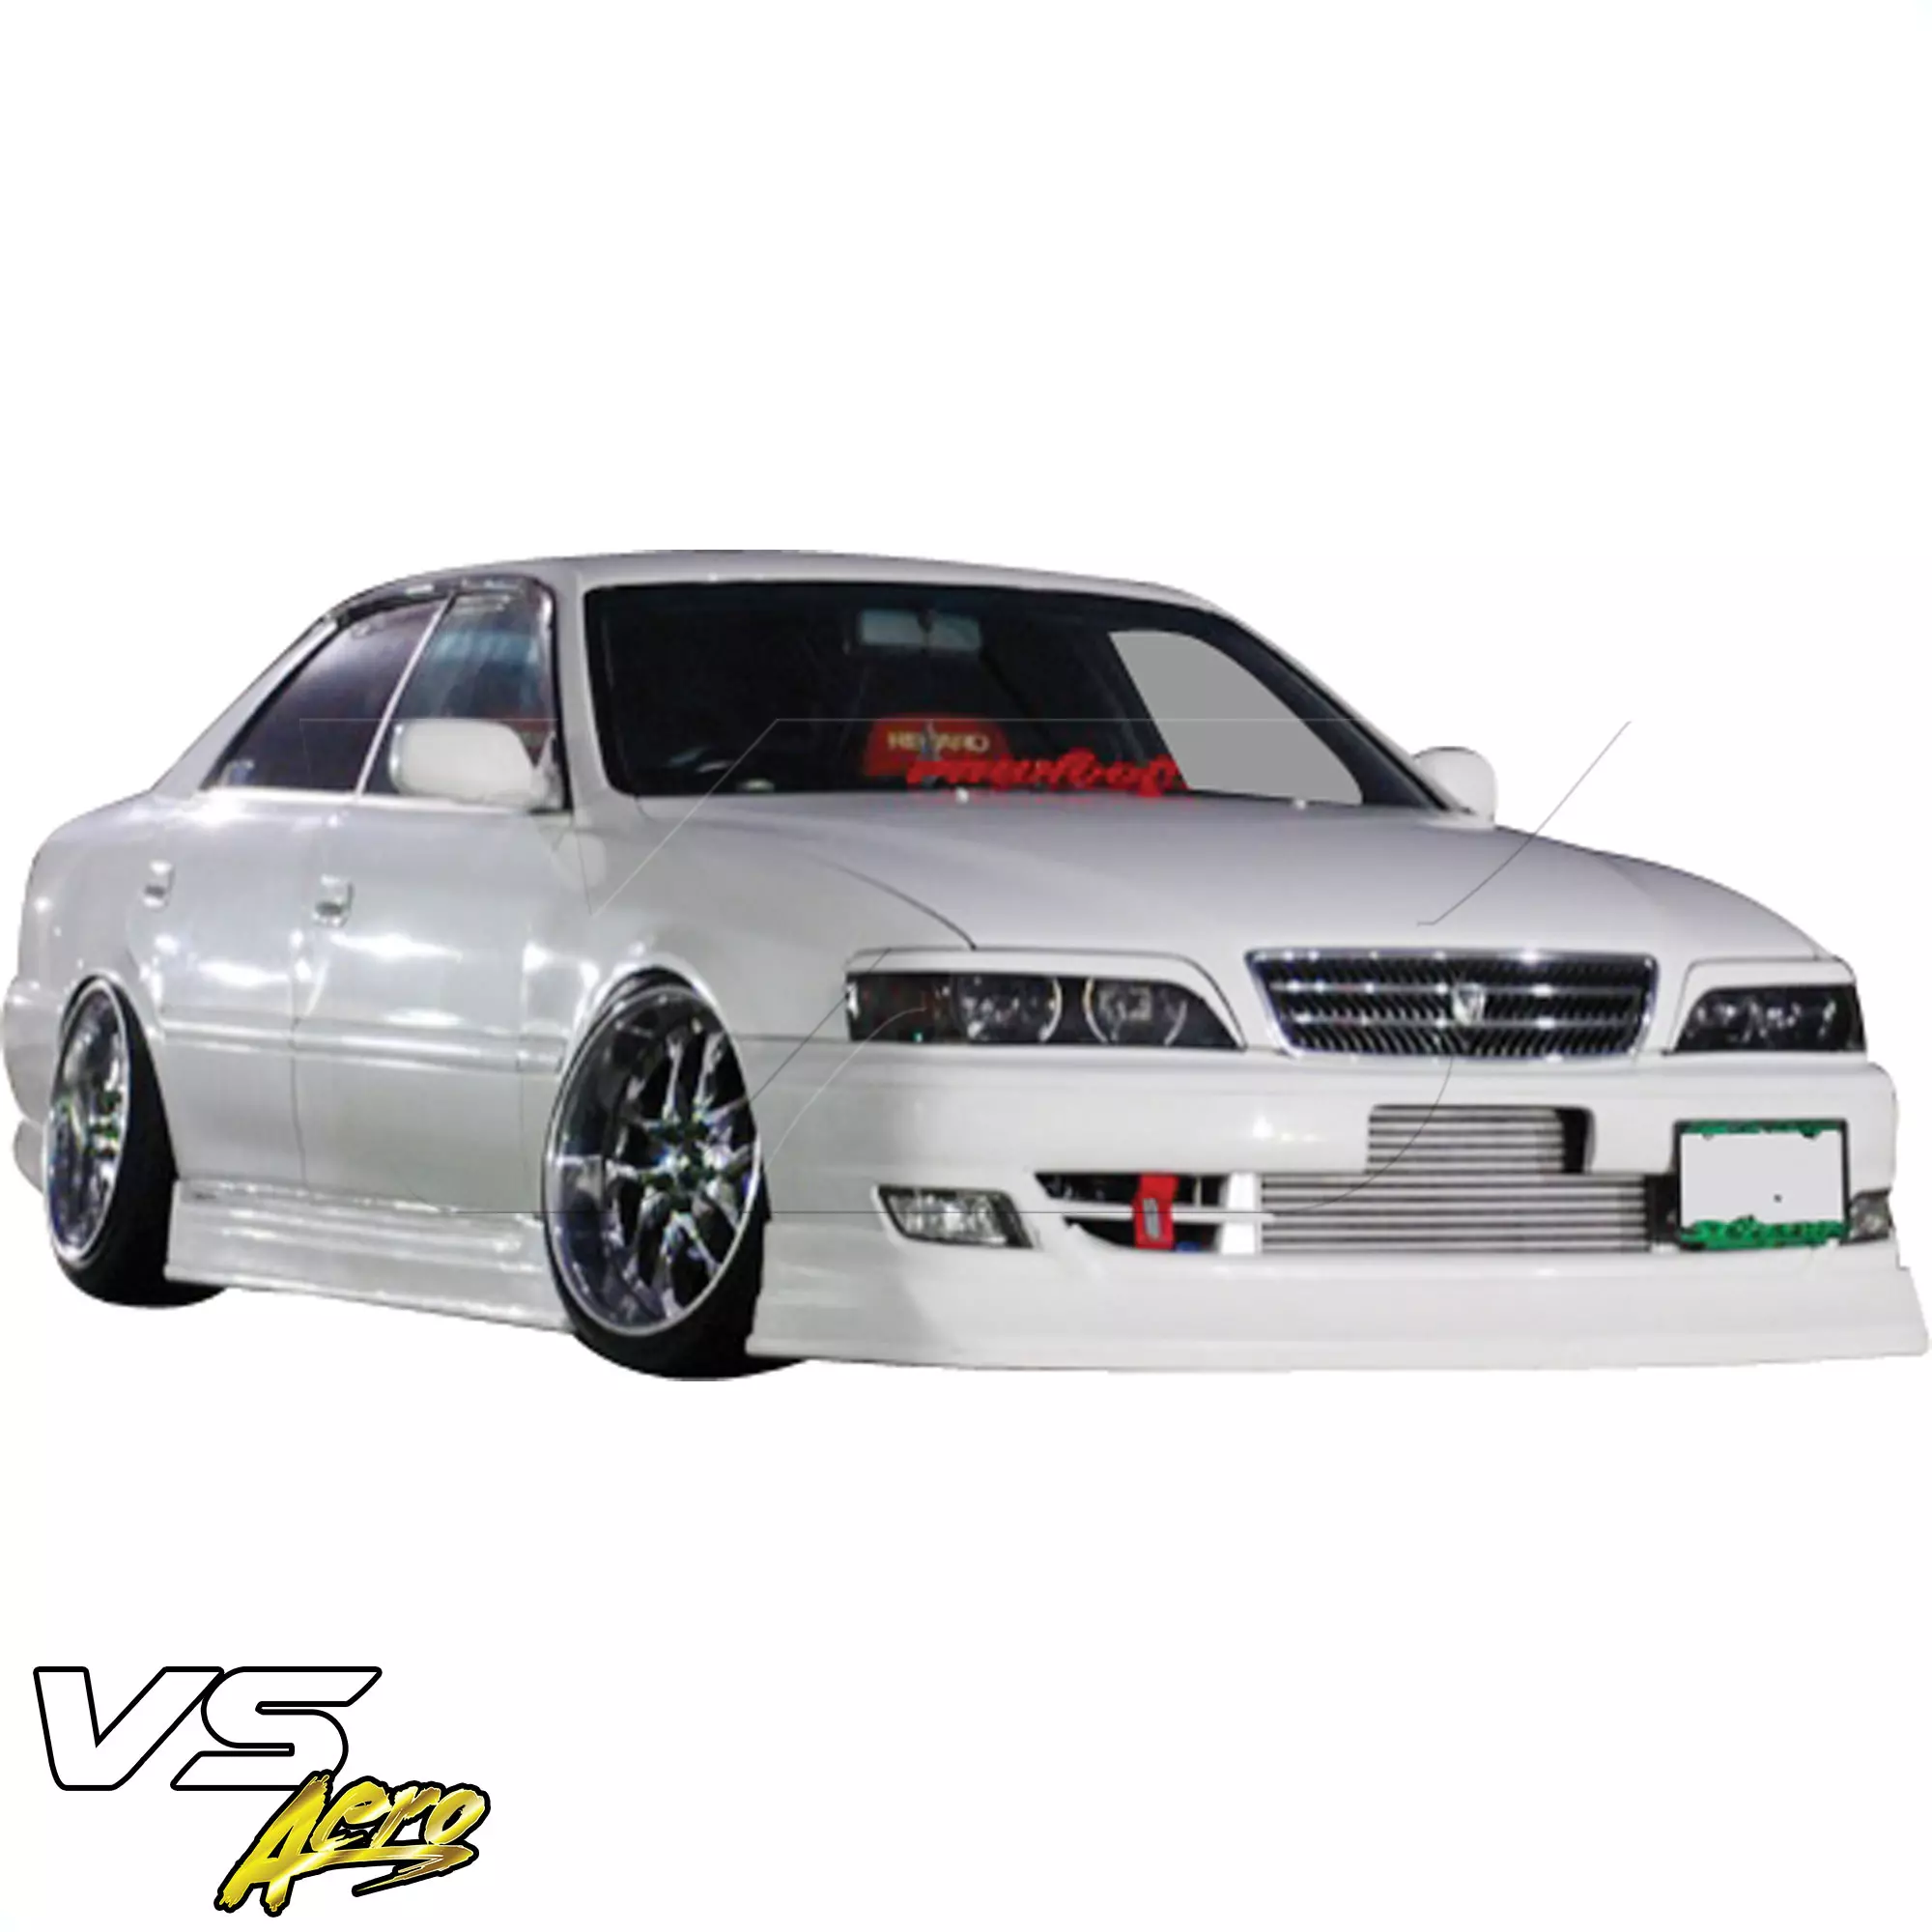 VSaero FRP TRAU Late Front Lip Valance > Toyota Chaser JZX100 1999-2000 - Image 1